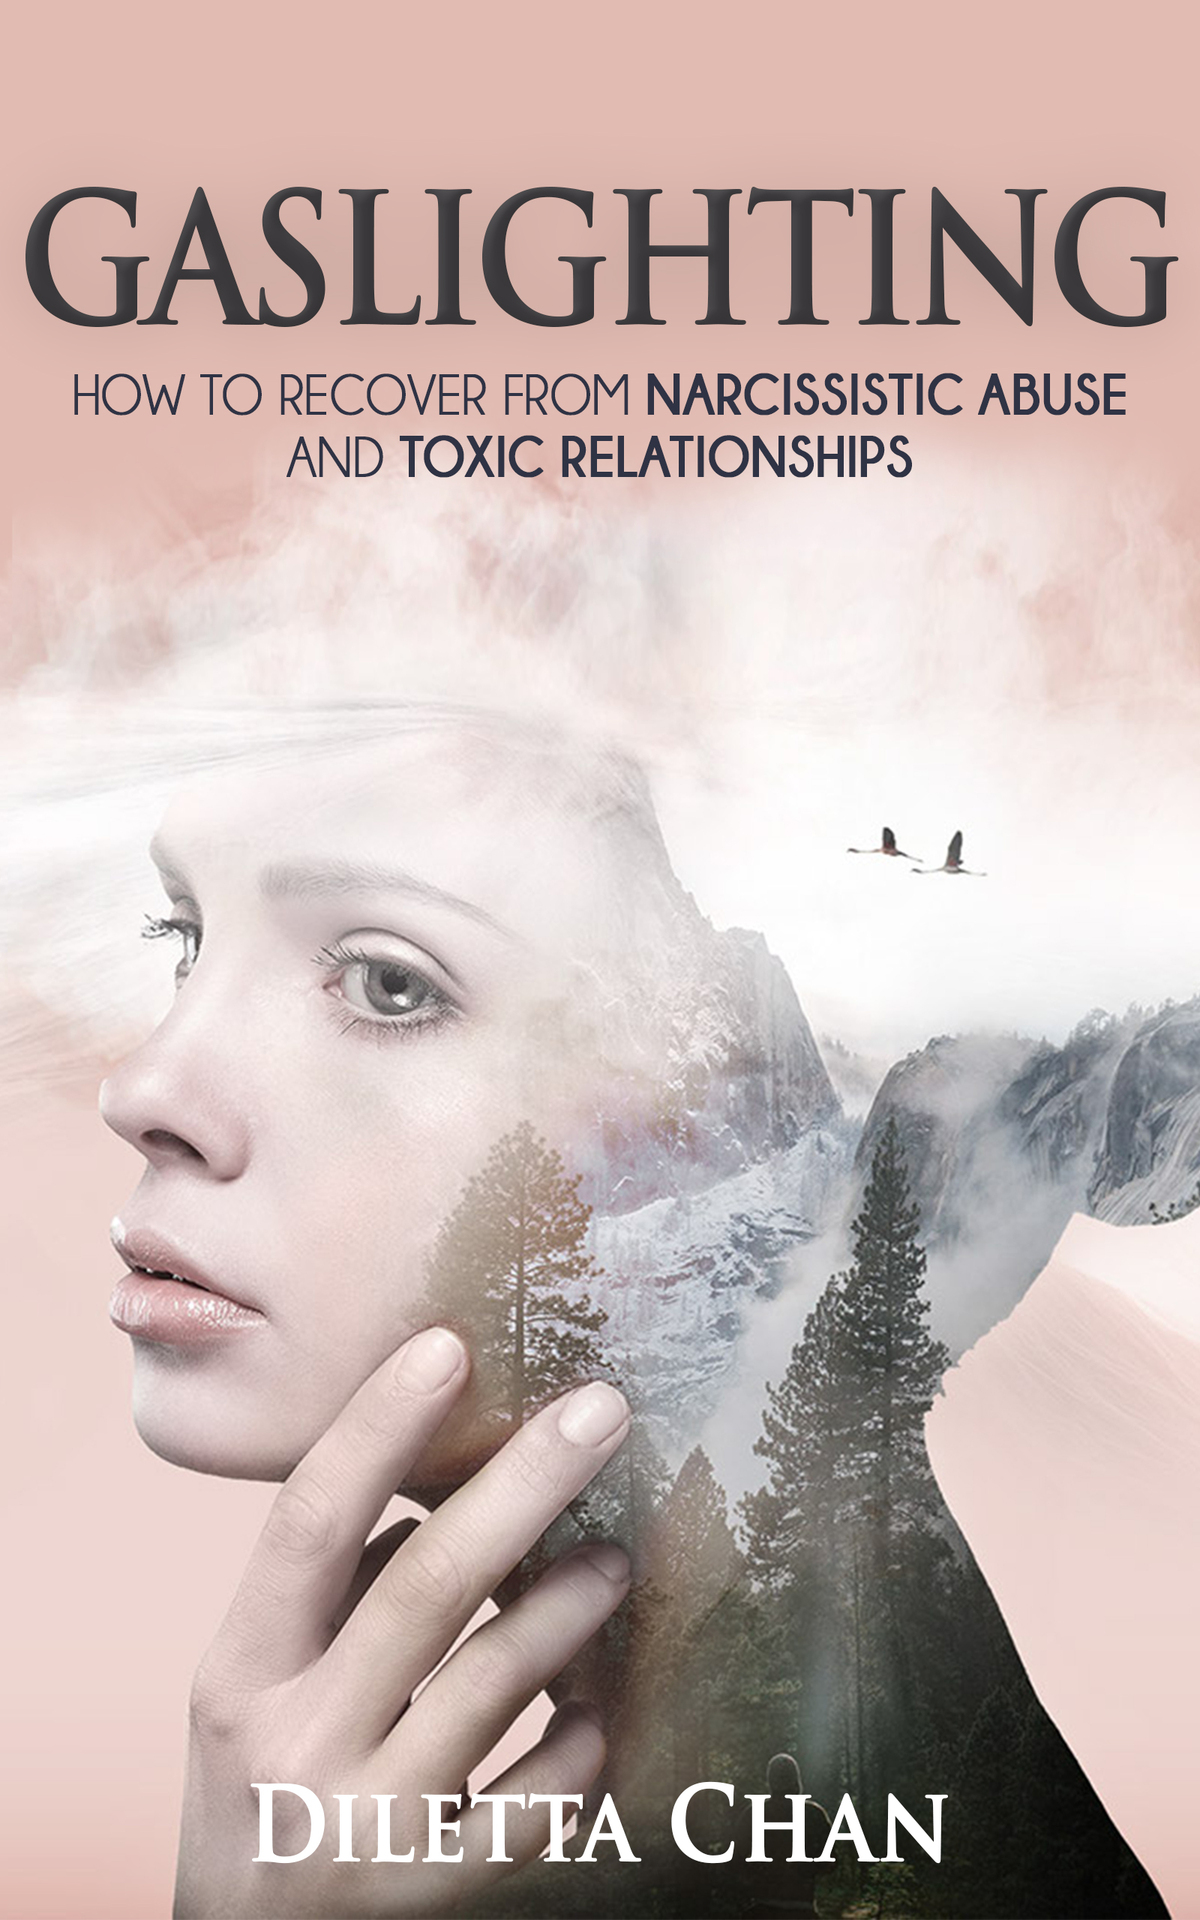 Gaslighting: How to Recover From Narcissistic Abuse and Toxic Relationships